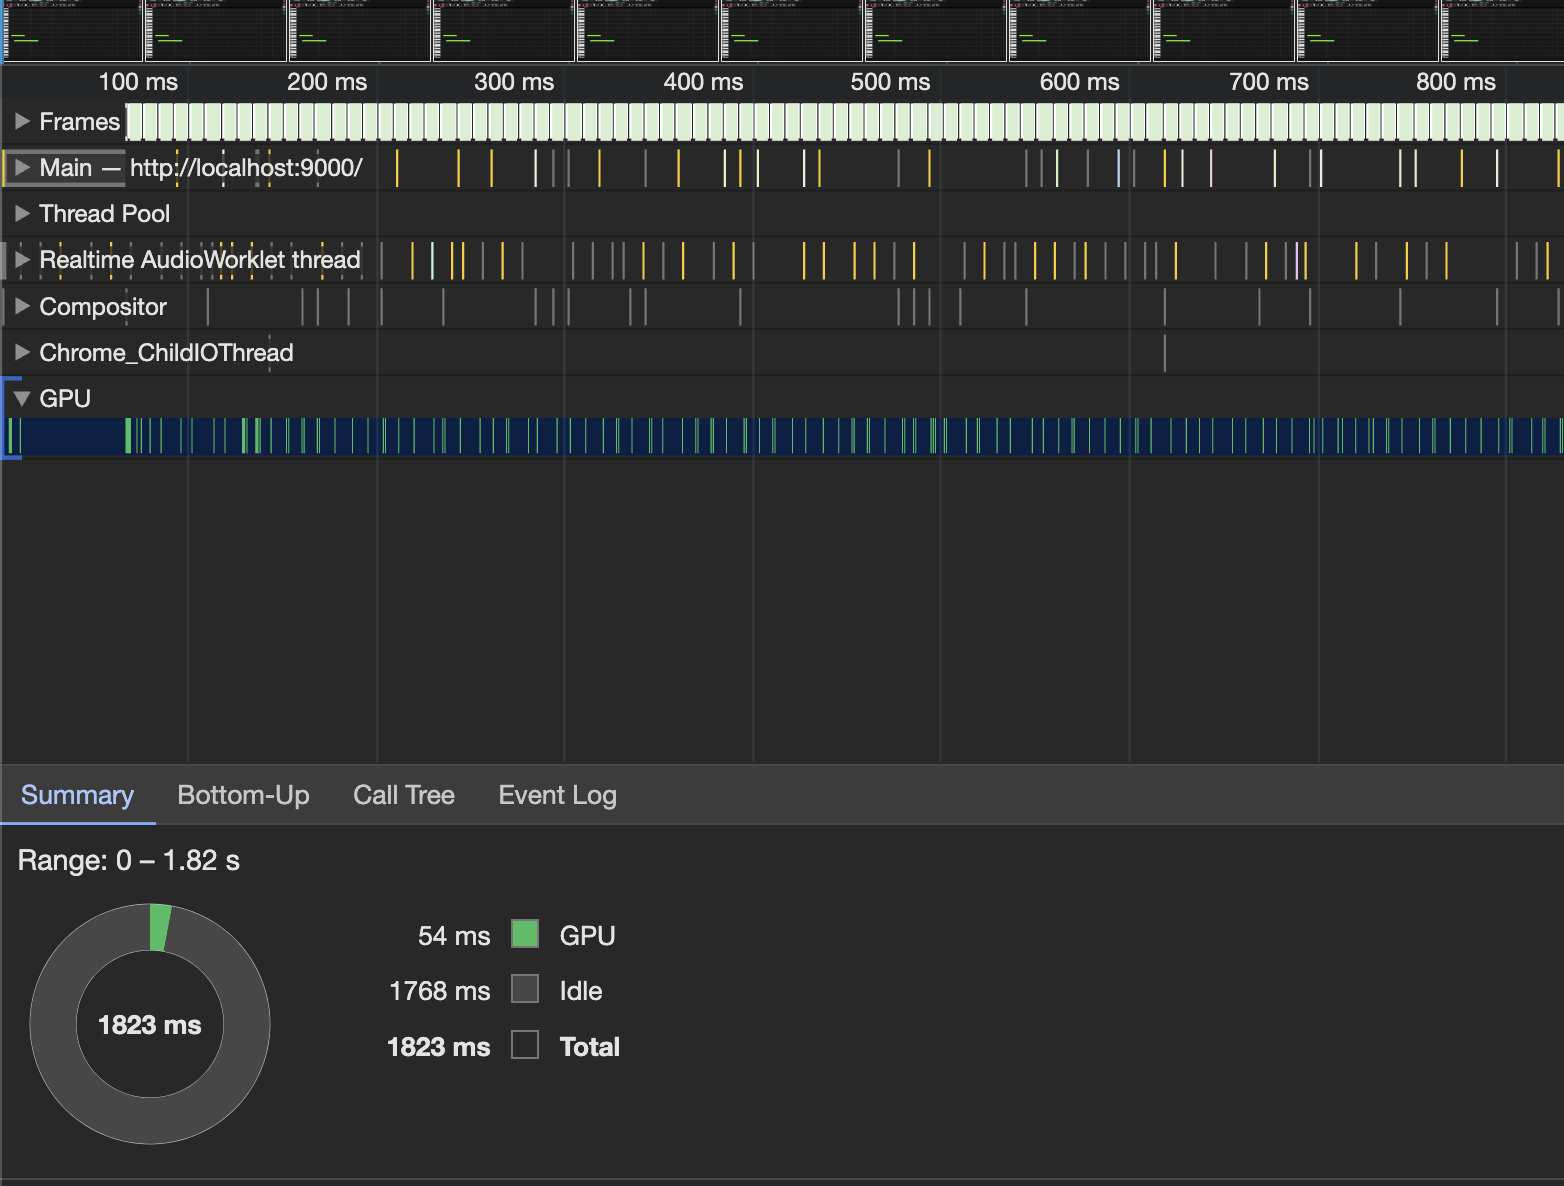 Screenshot of chrome browser dev tools showing the results of a profiling run done on the MIDI editor.  It shows that the GPU utilization is very low at around 5% or less and the CPU is mostly idle.